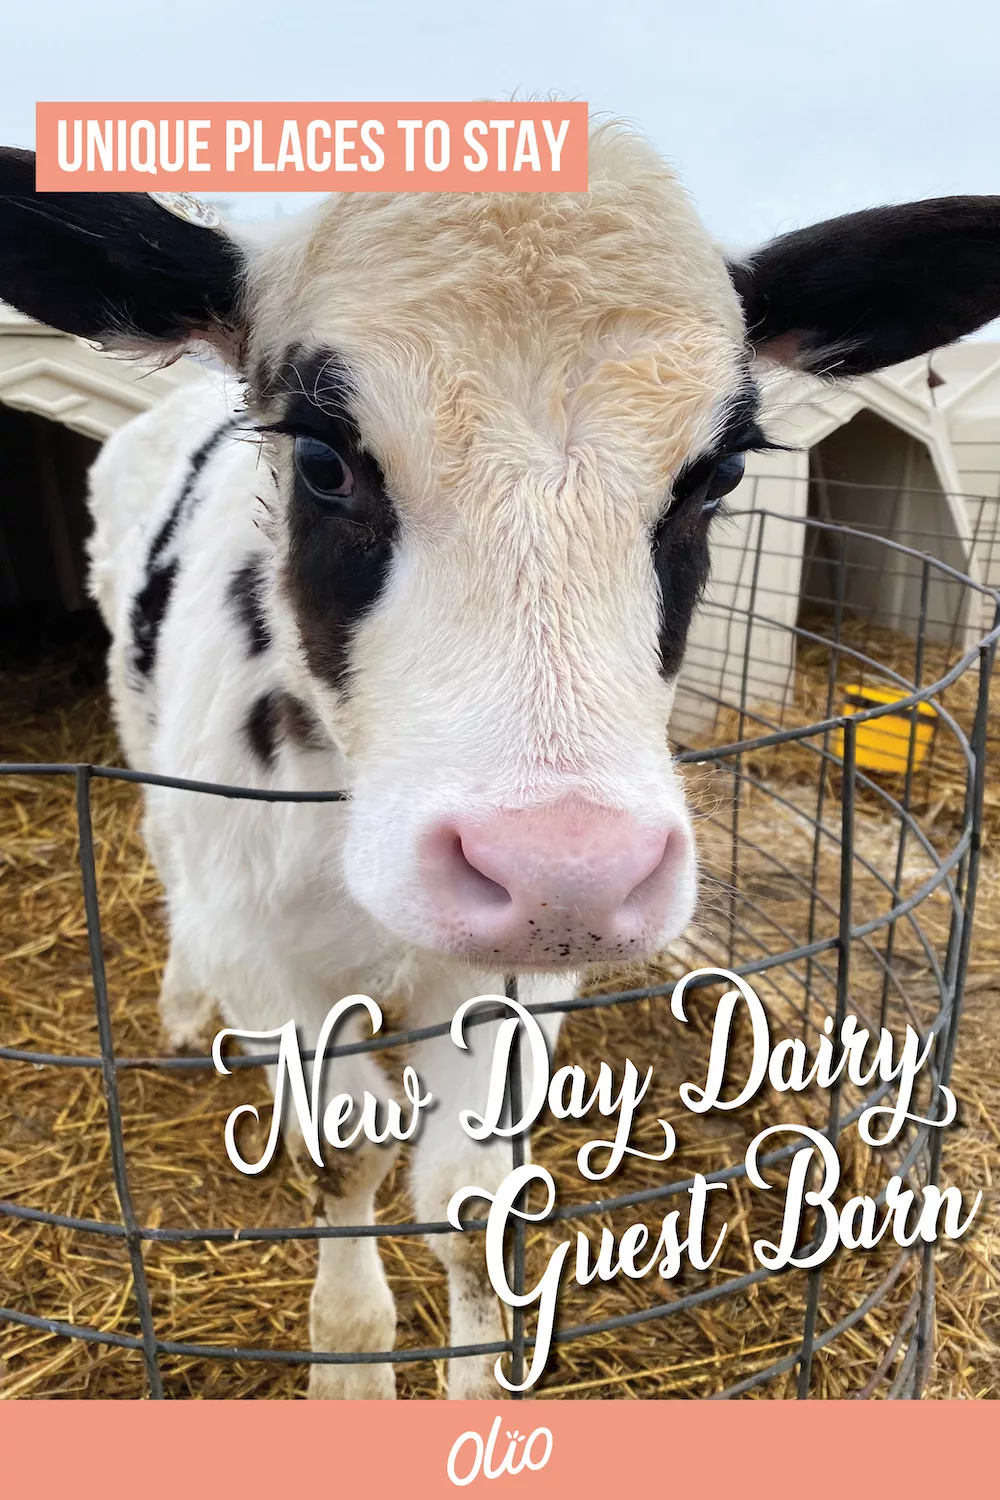 Looking for a unique Iowa weekend getaway? Plan a visit to the New Day Dairy Guest Barn in Clarksville, Iowa! This fun accommodation at a working dairy farm will give you the perfect place to relax while getting a behind-the-scenes look at what it takes to be a dairy farmer. #Iowa #Midwest #travel #MidwestGetaway